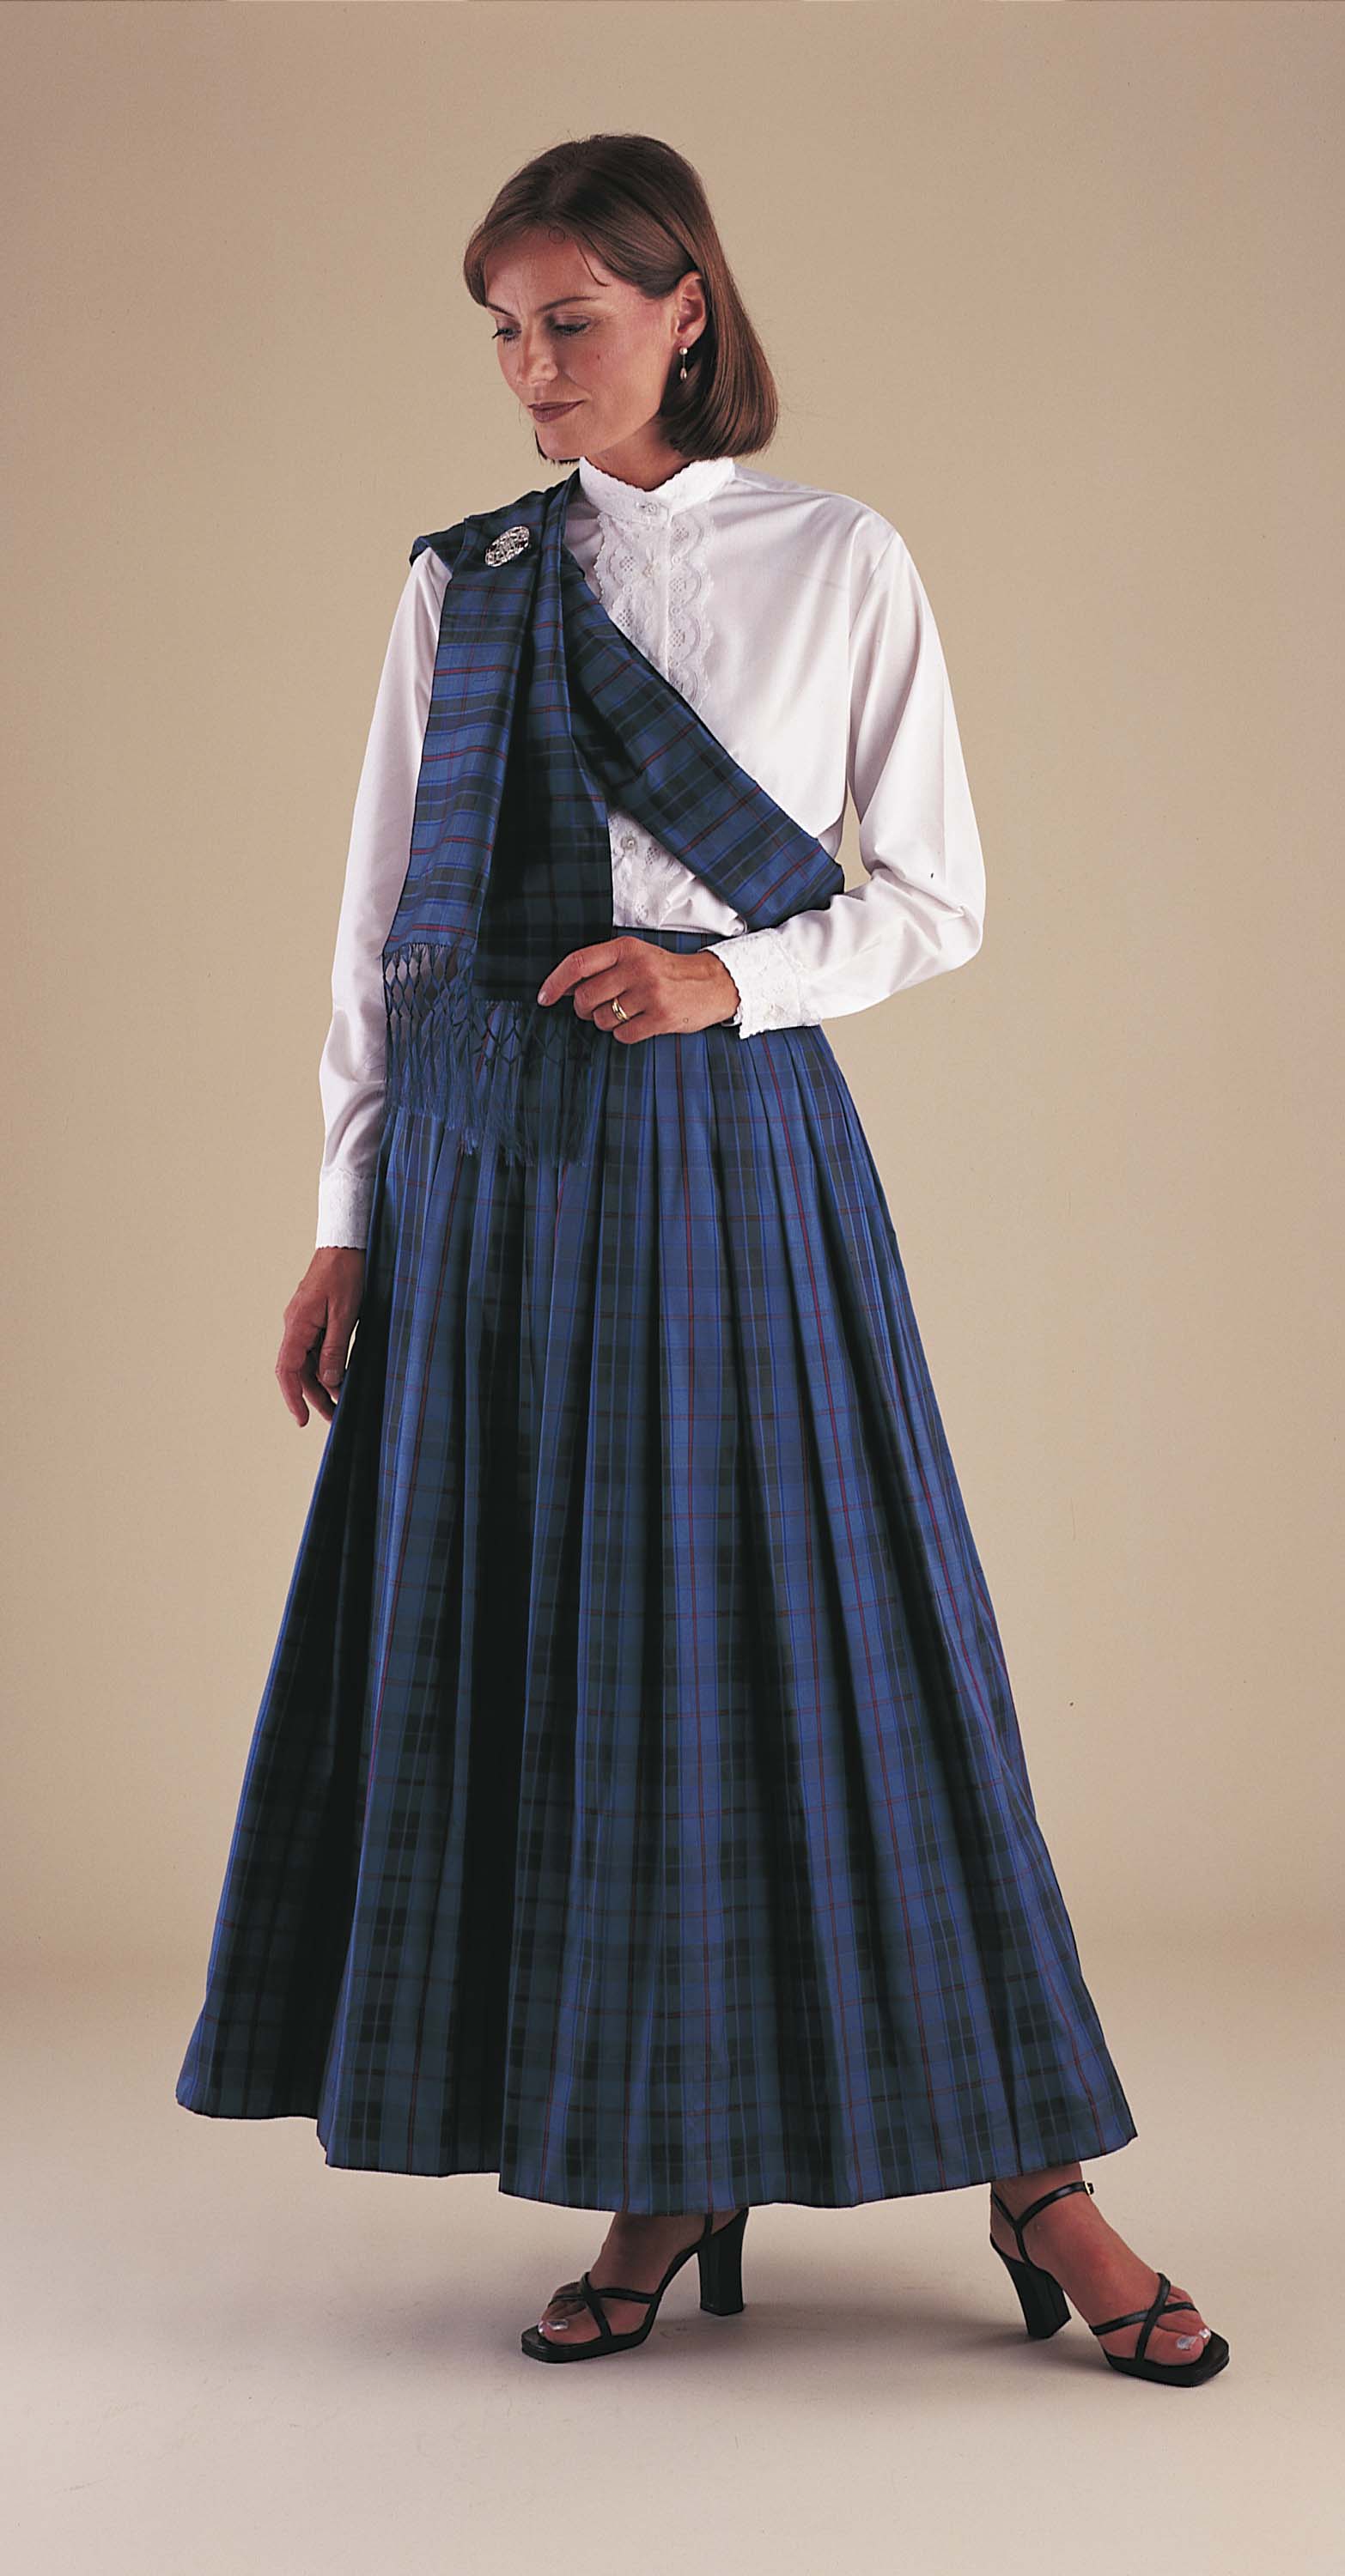 Womens Highland Dress Clothing | Buy Online Now - Kinloch Anderson1566 x 3000